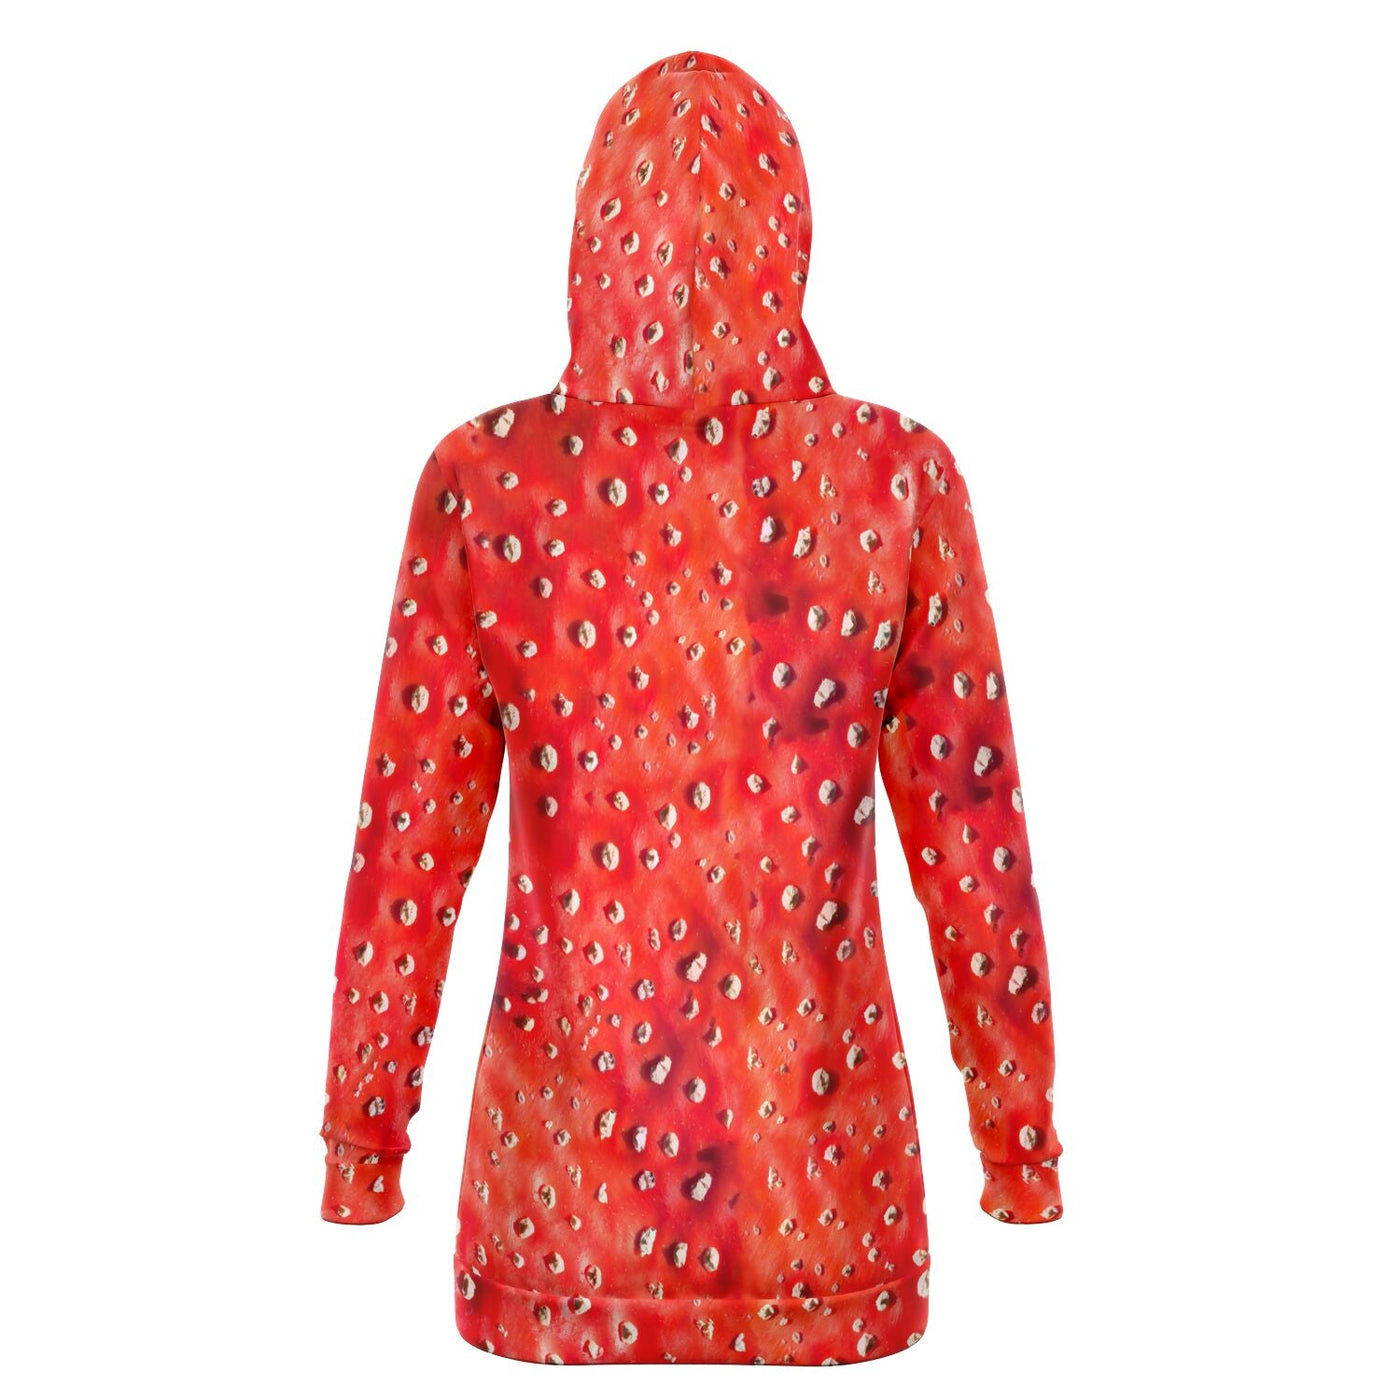 Fly Agaric all-over | Hippie Raver Long Hoodie Dress